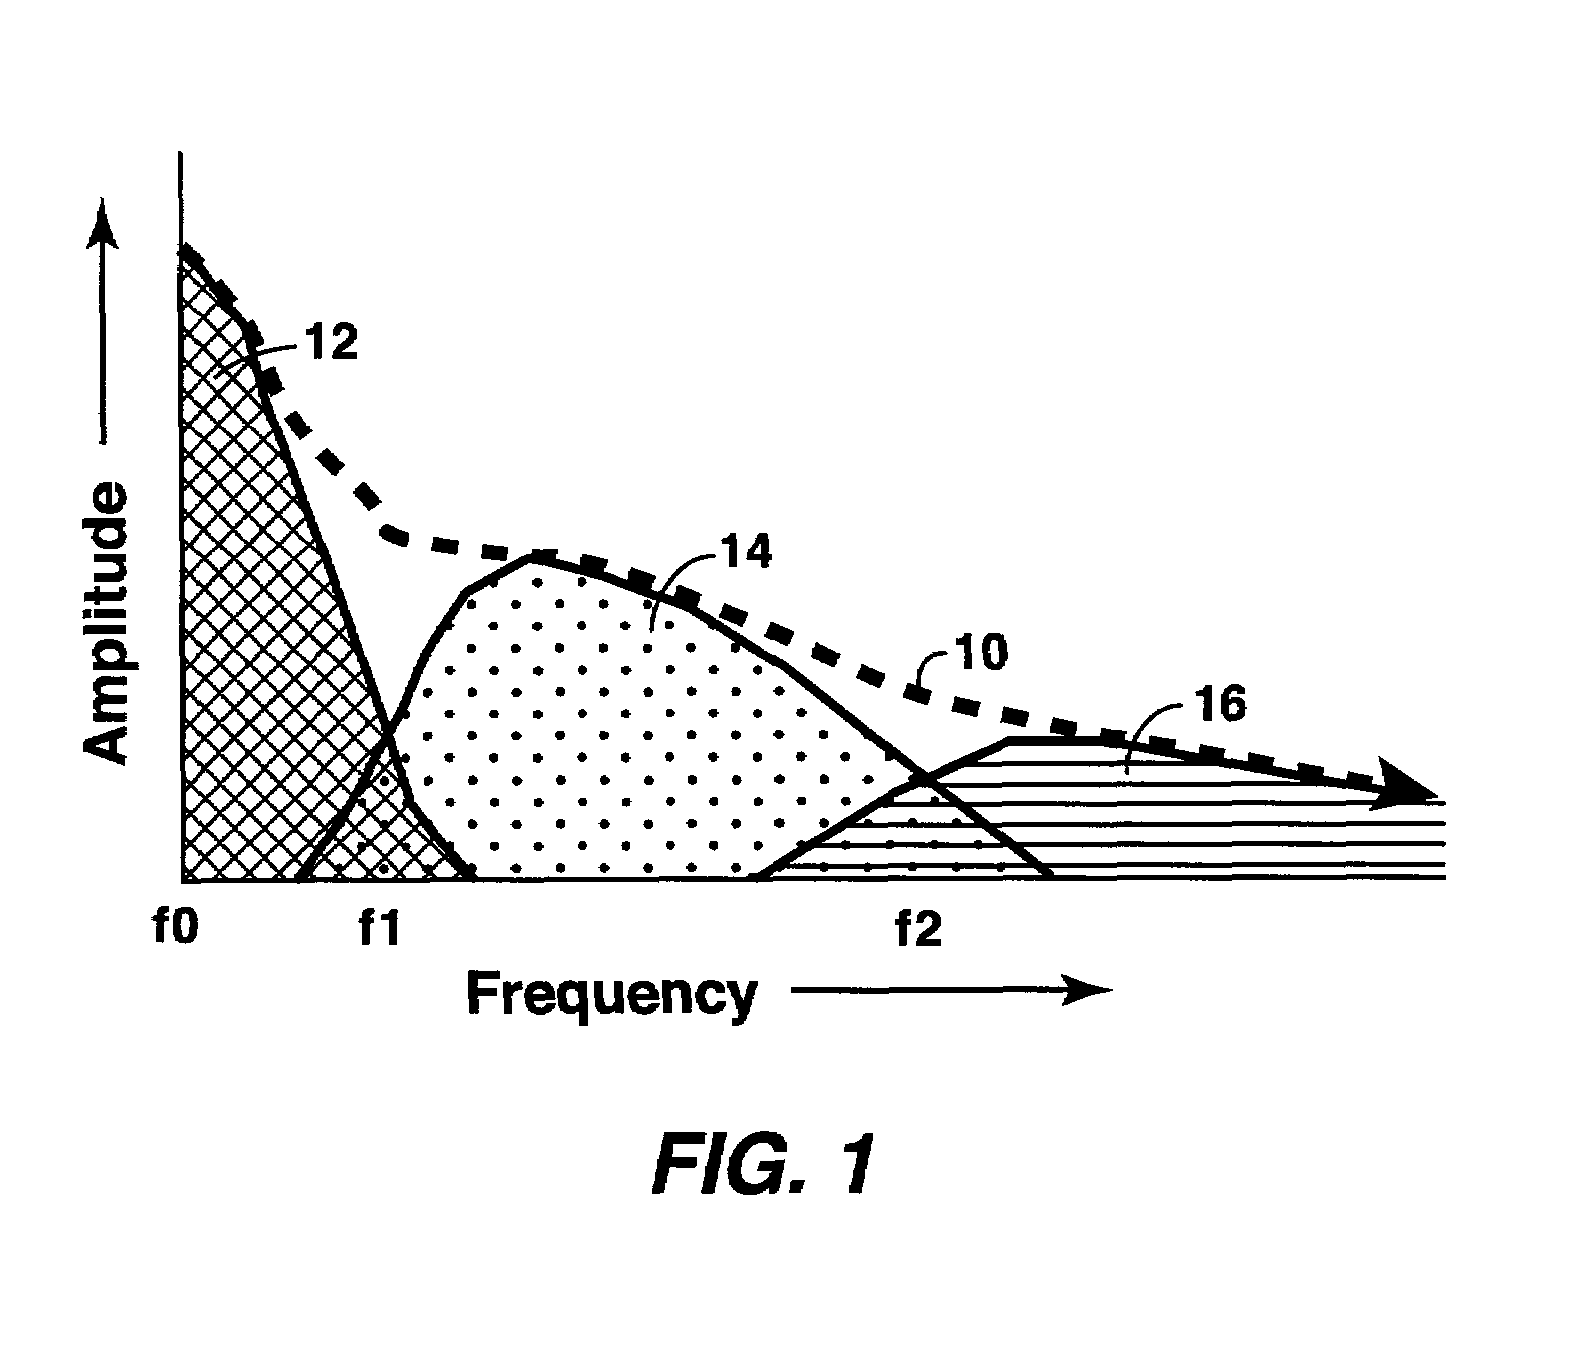 Method for constructing 3-D geologic models by combining multiple frequency passbands